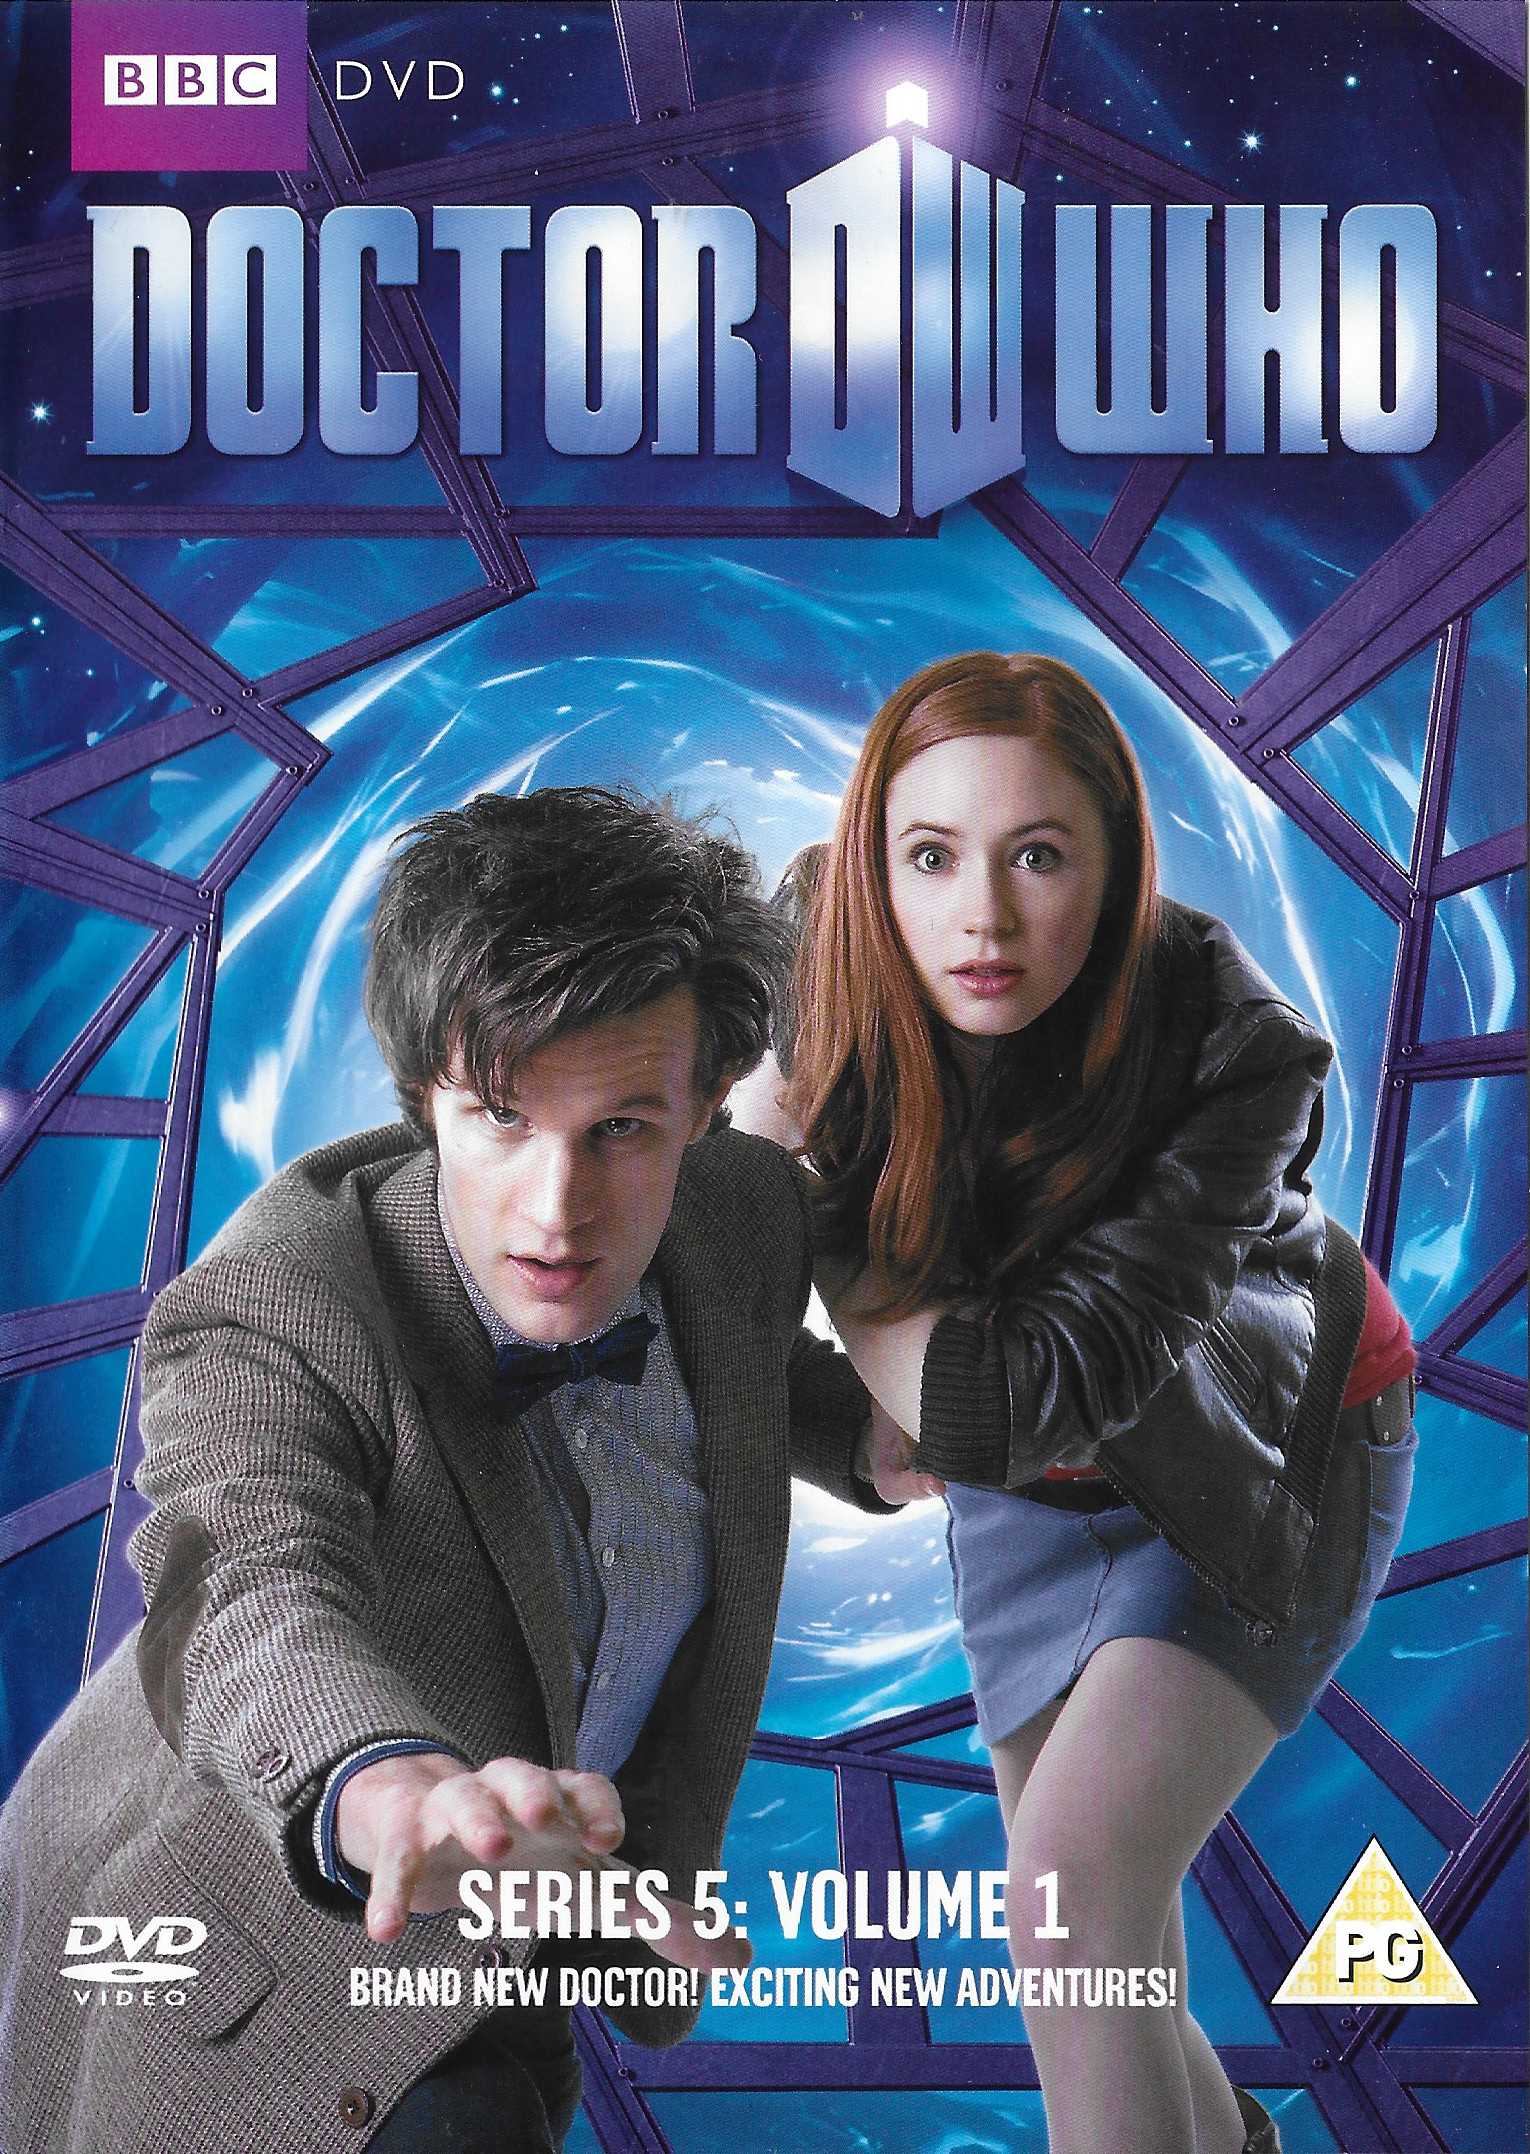 Picture of BBCDVD 3213 Doctor Who - Series 5, volume 1 by artist Steven Moffat / Mark Gatiss from the BBC records and Tapes library